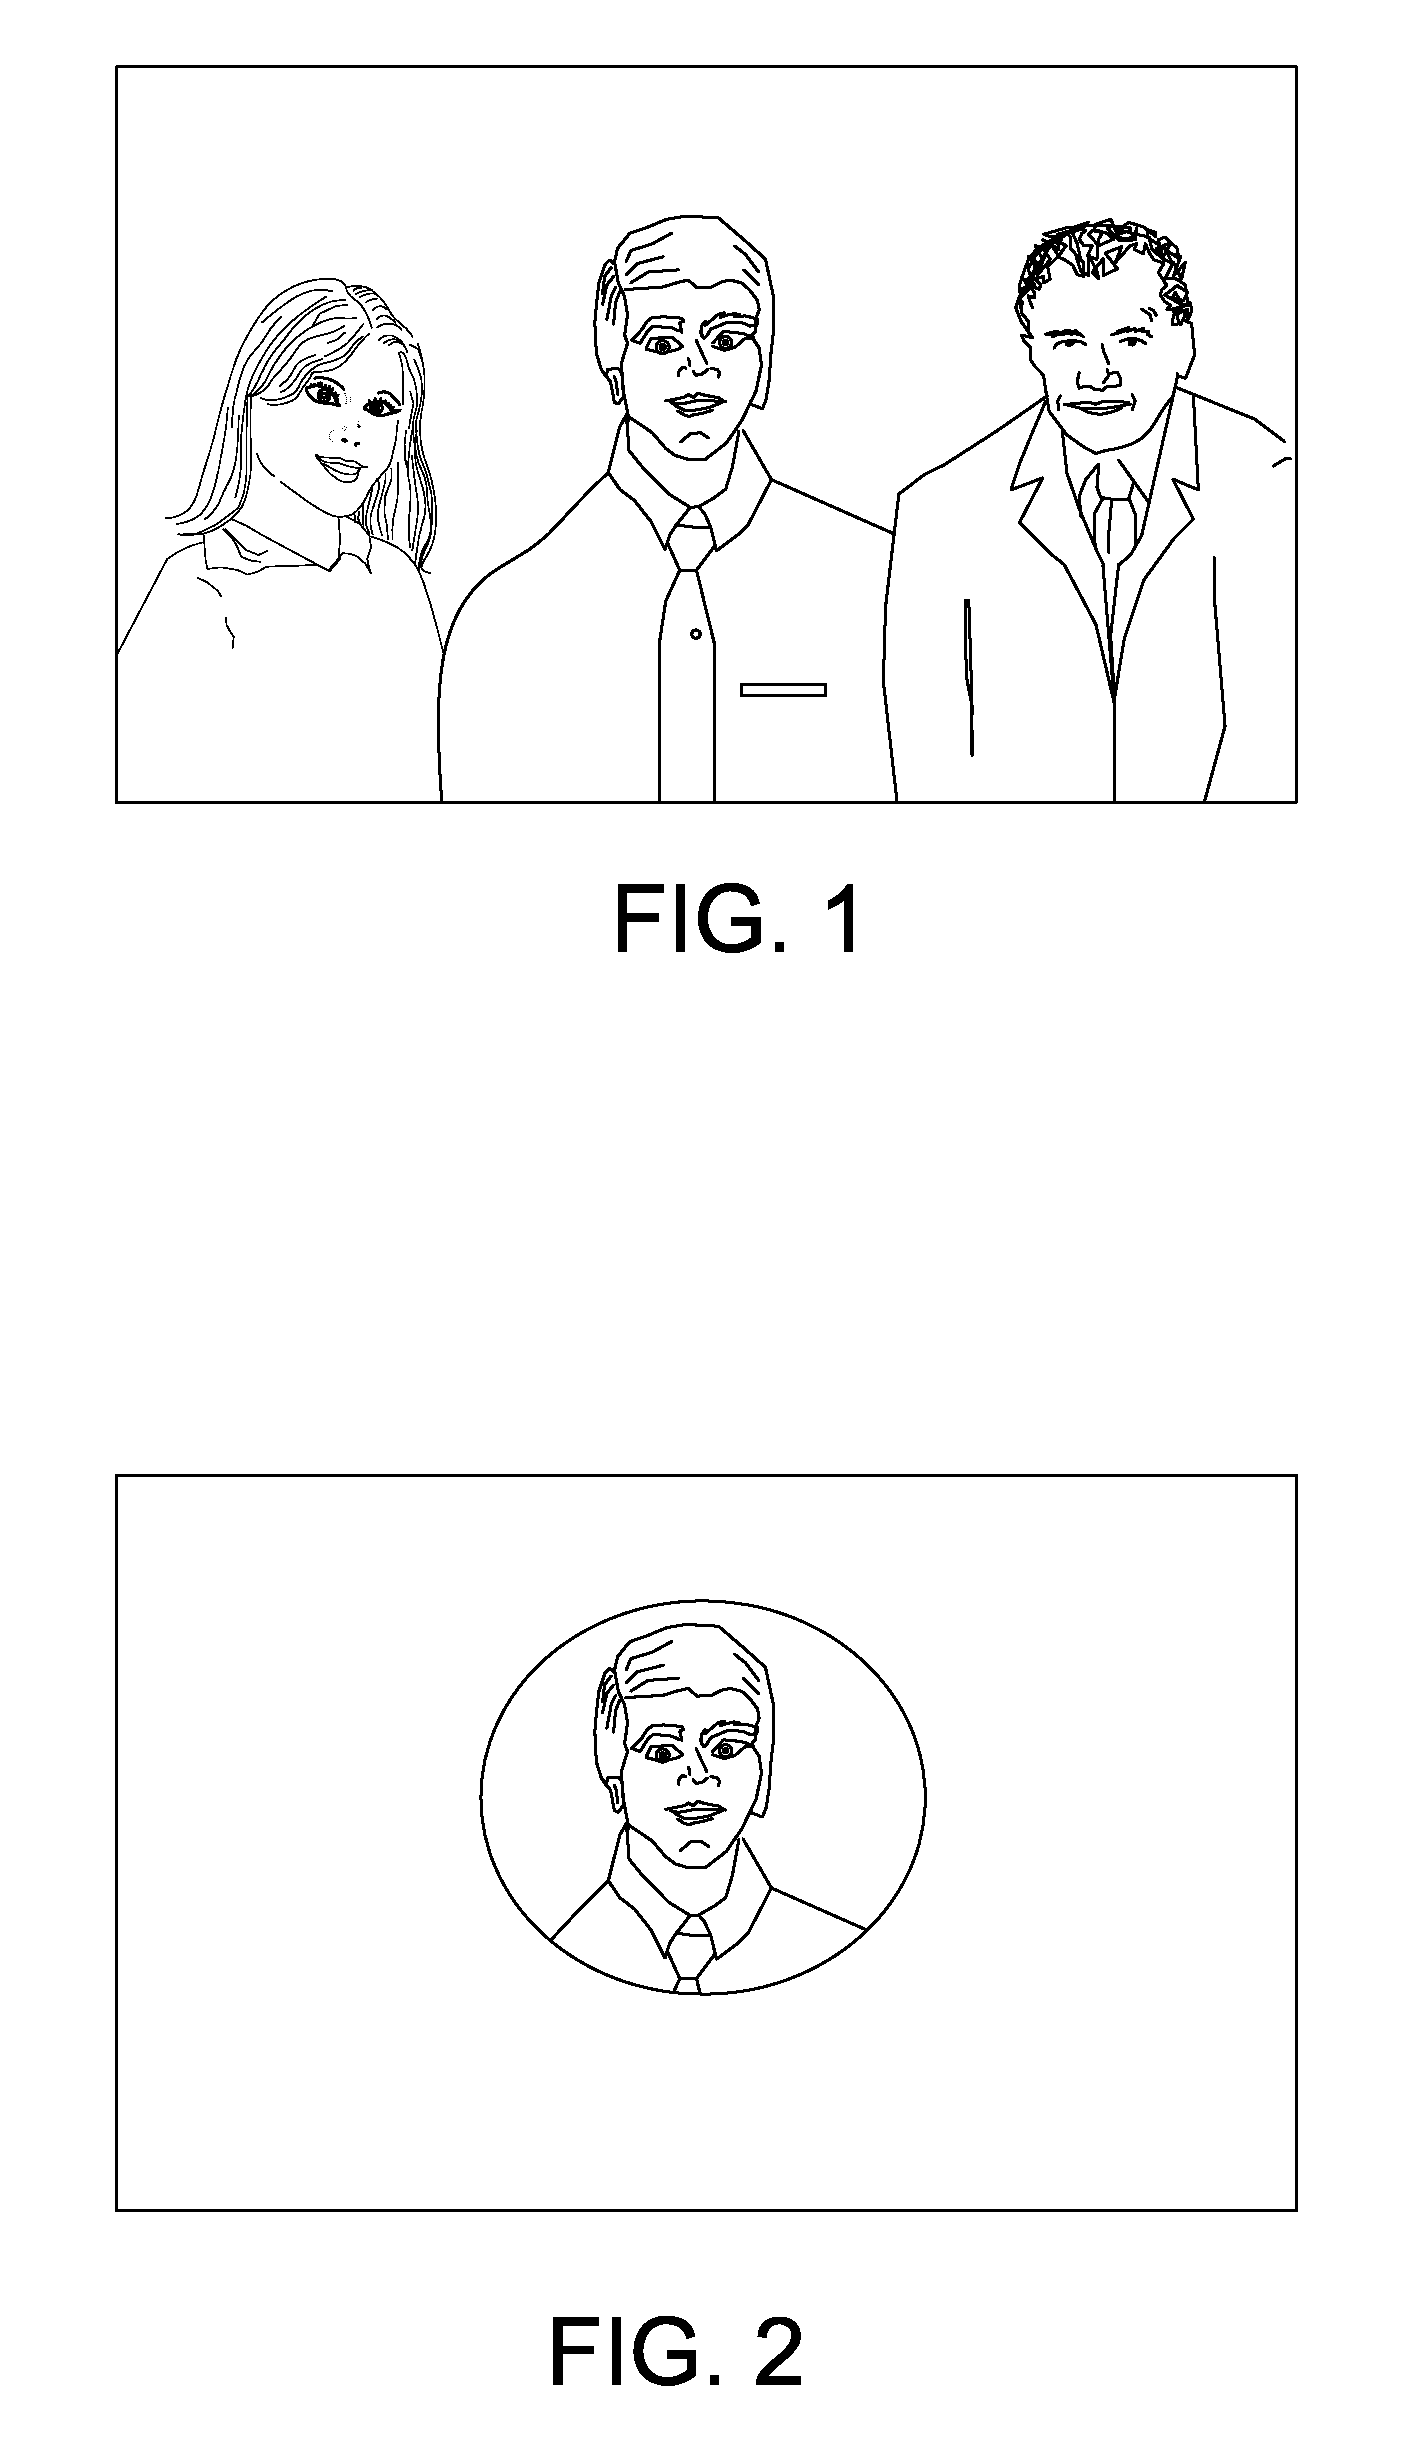 Apparatus and method for enhancing field of vision of the visually impaired